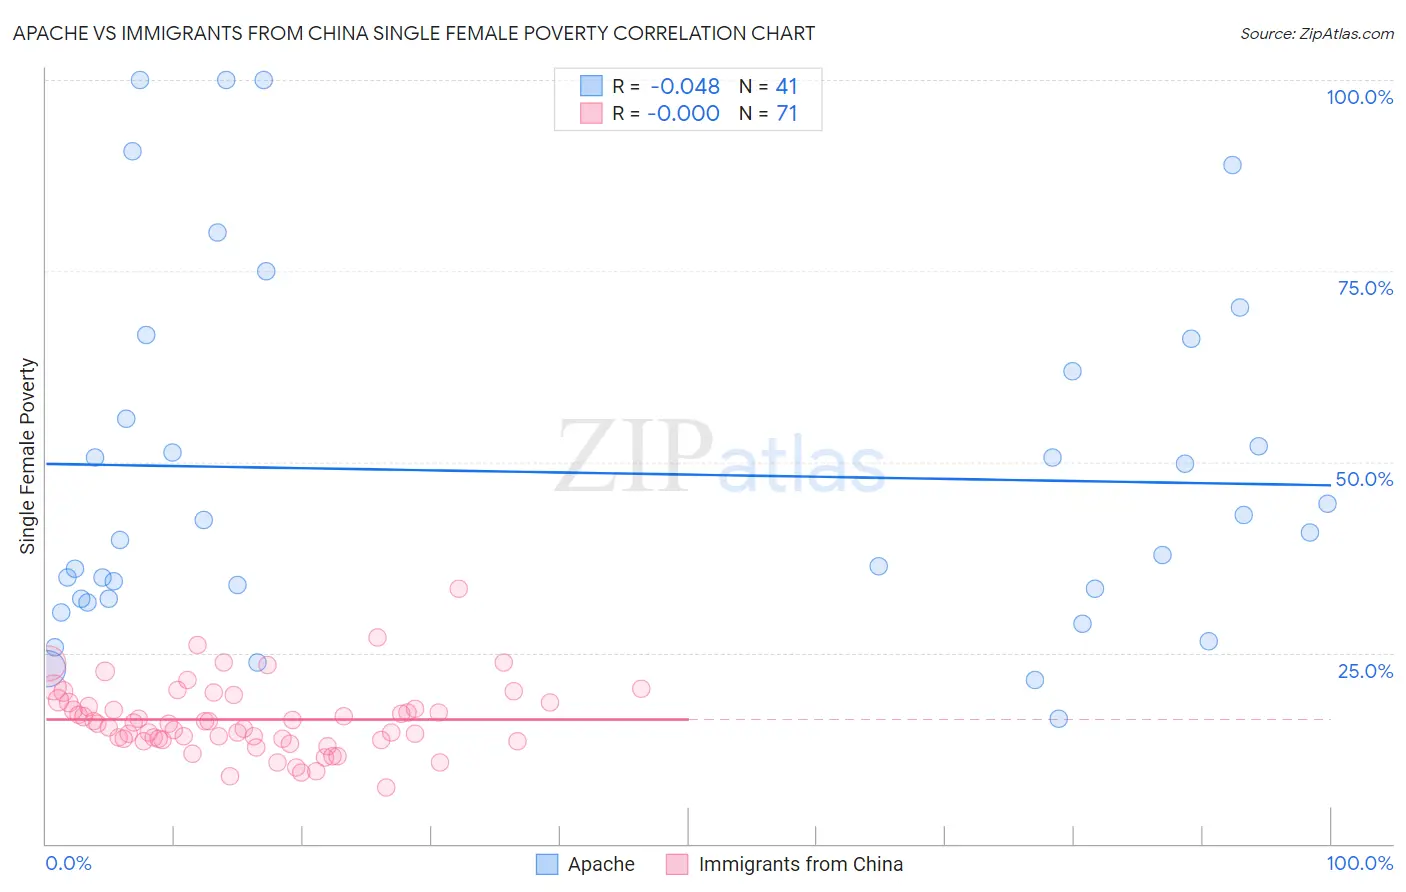 Apache vs Immigrants from China Single Female Poverty